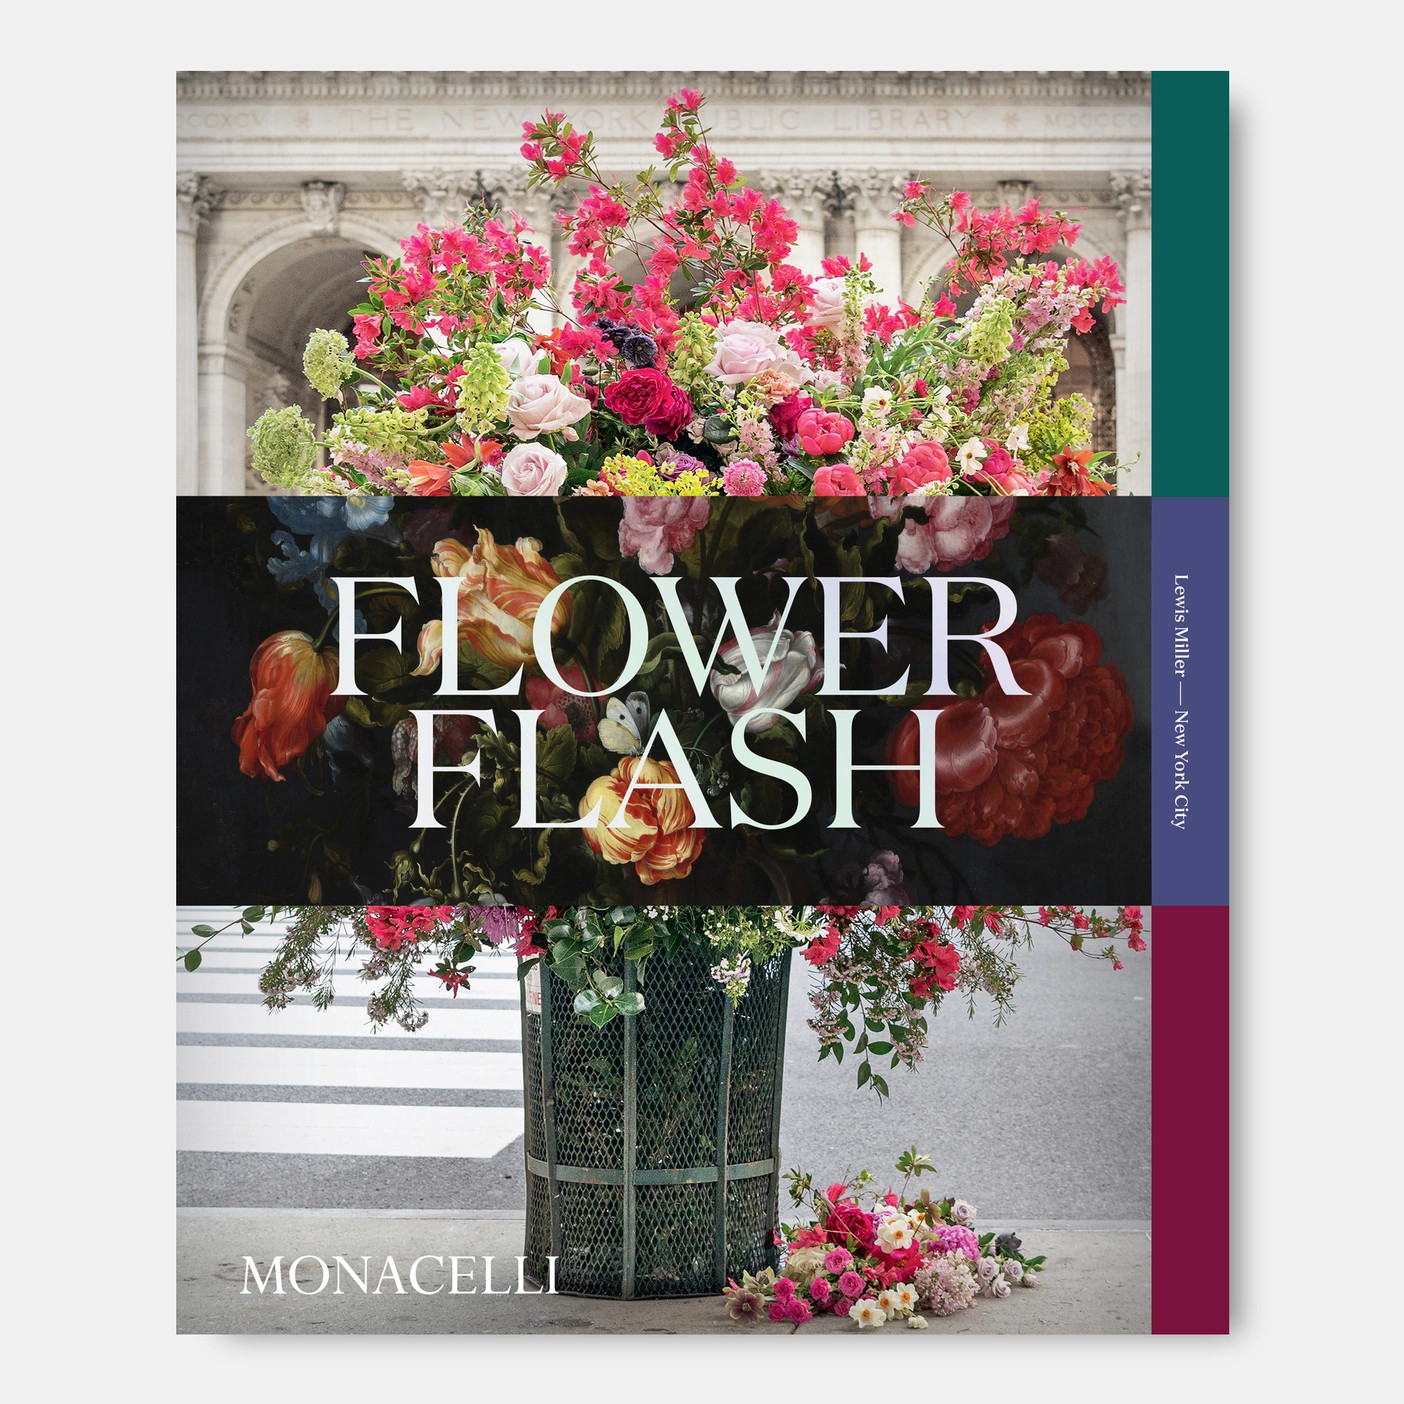 All you need to know about Flower Flash